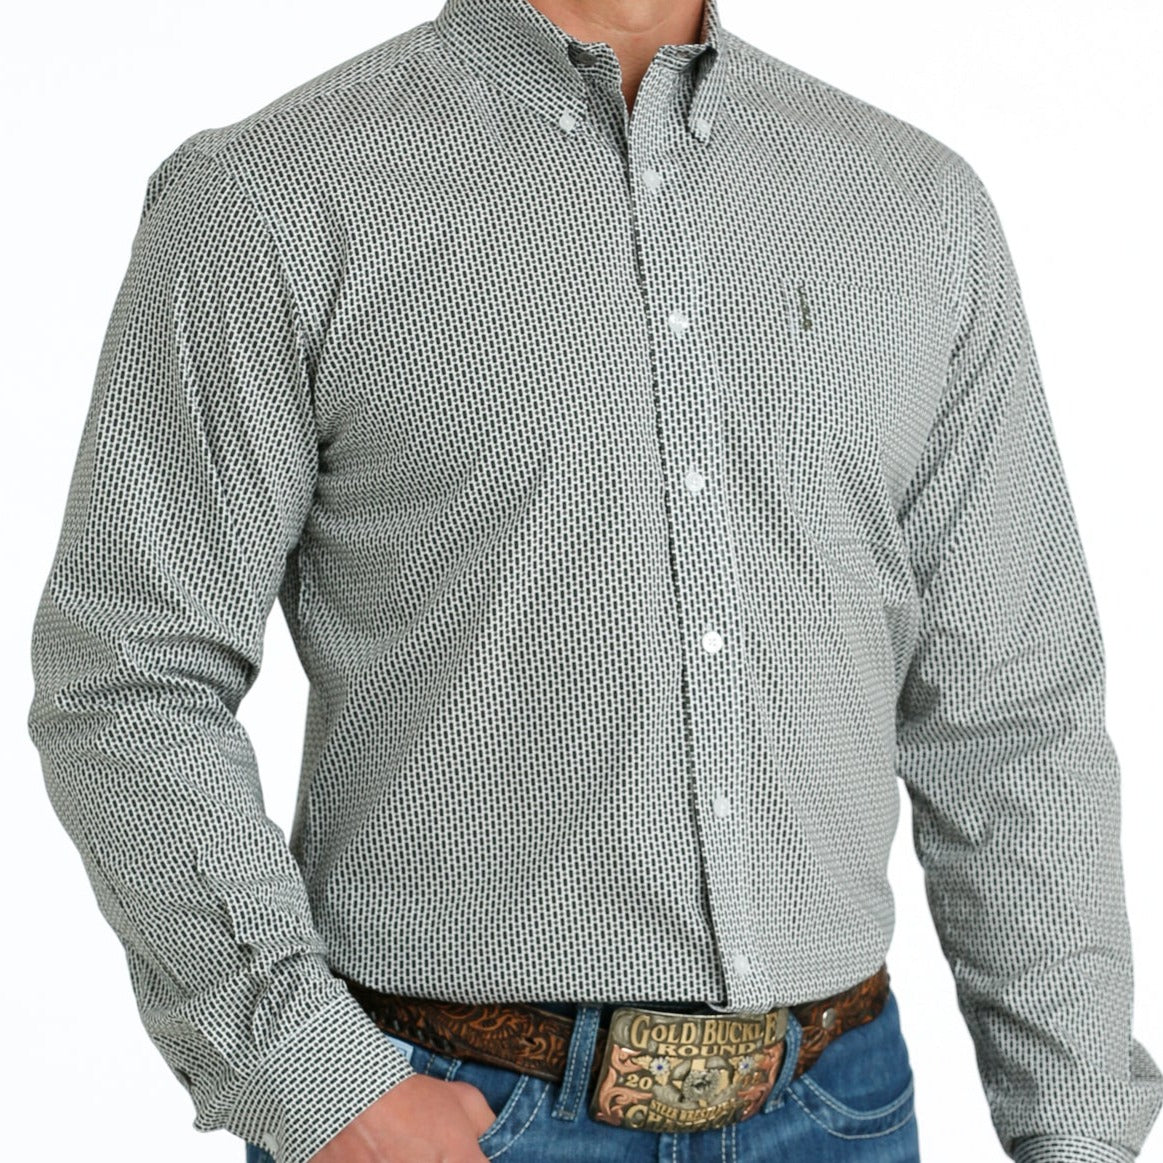 Cinch Men's Modern Fit White with Olive & Black Geometric Western Button Down Shirt